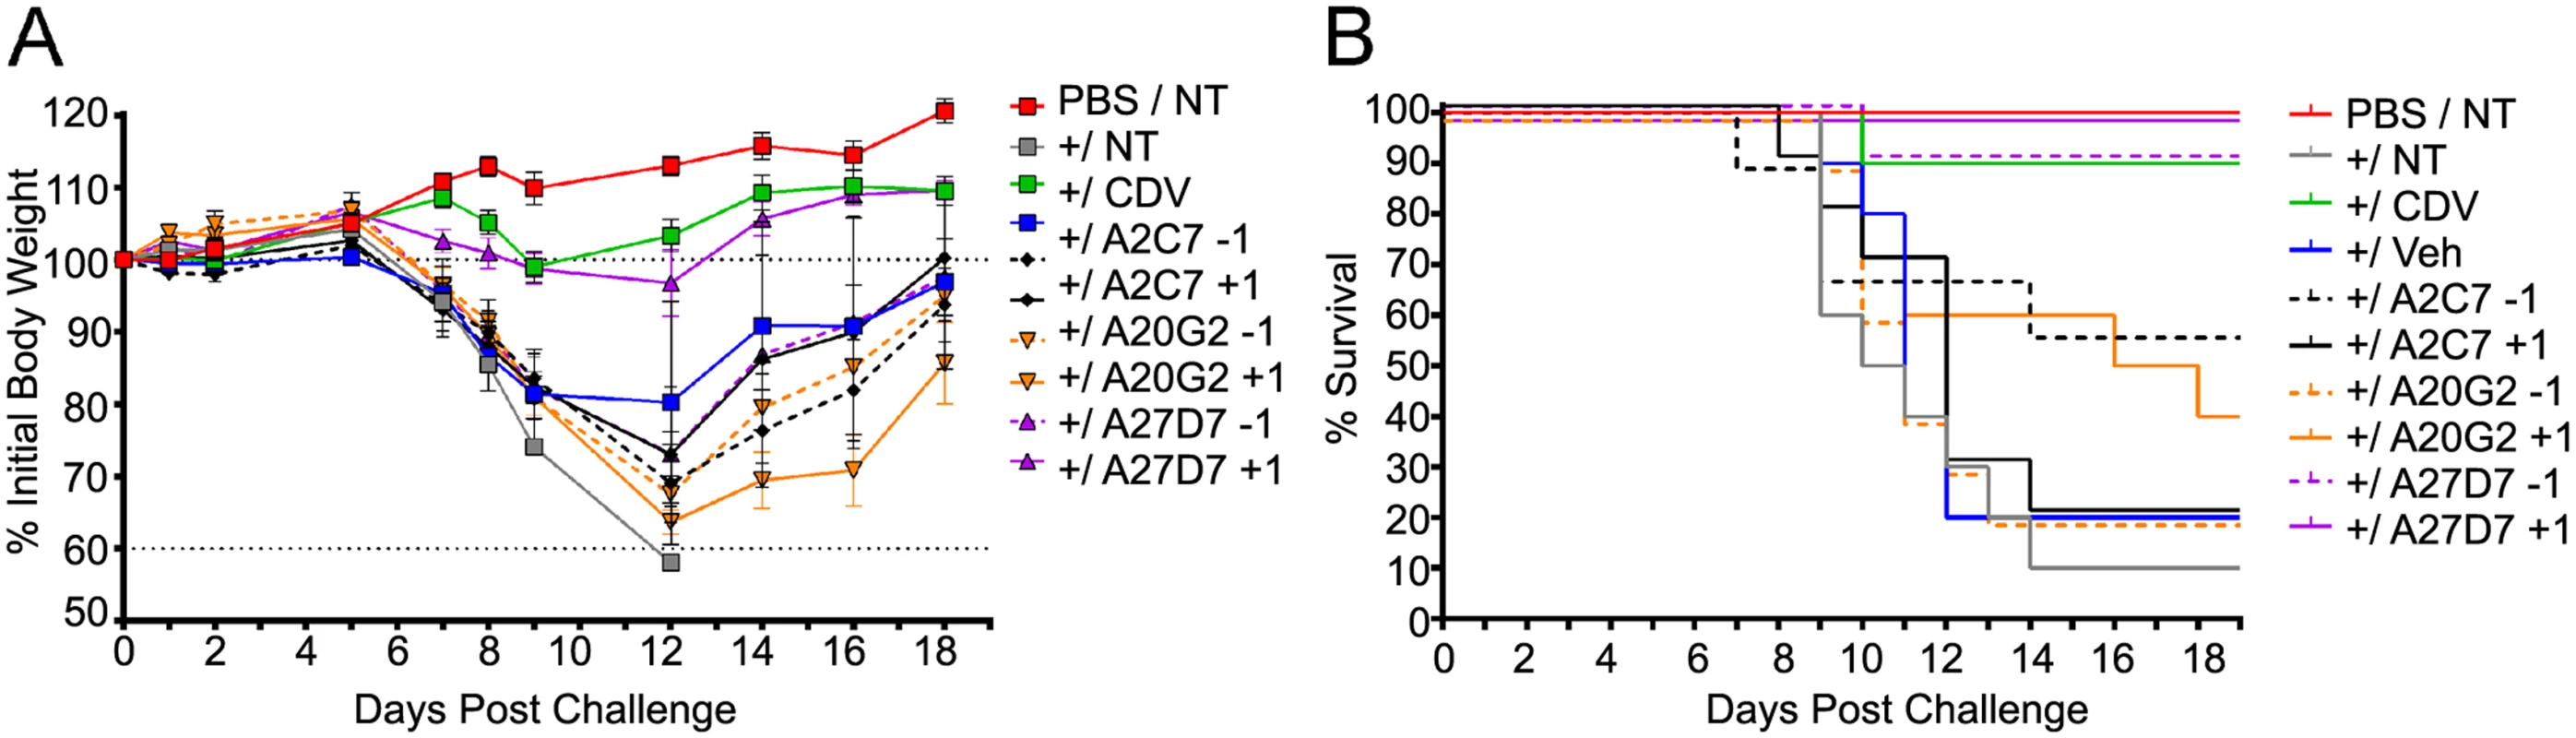 Treatment with antibody A27D7 protects mice against a lethal ECTV challenge.